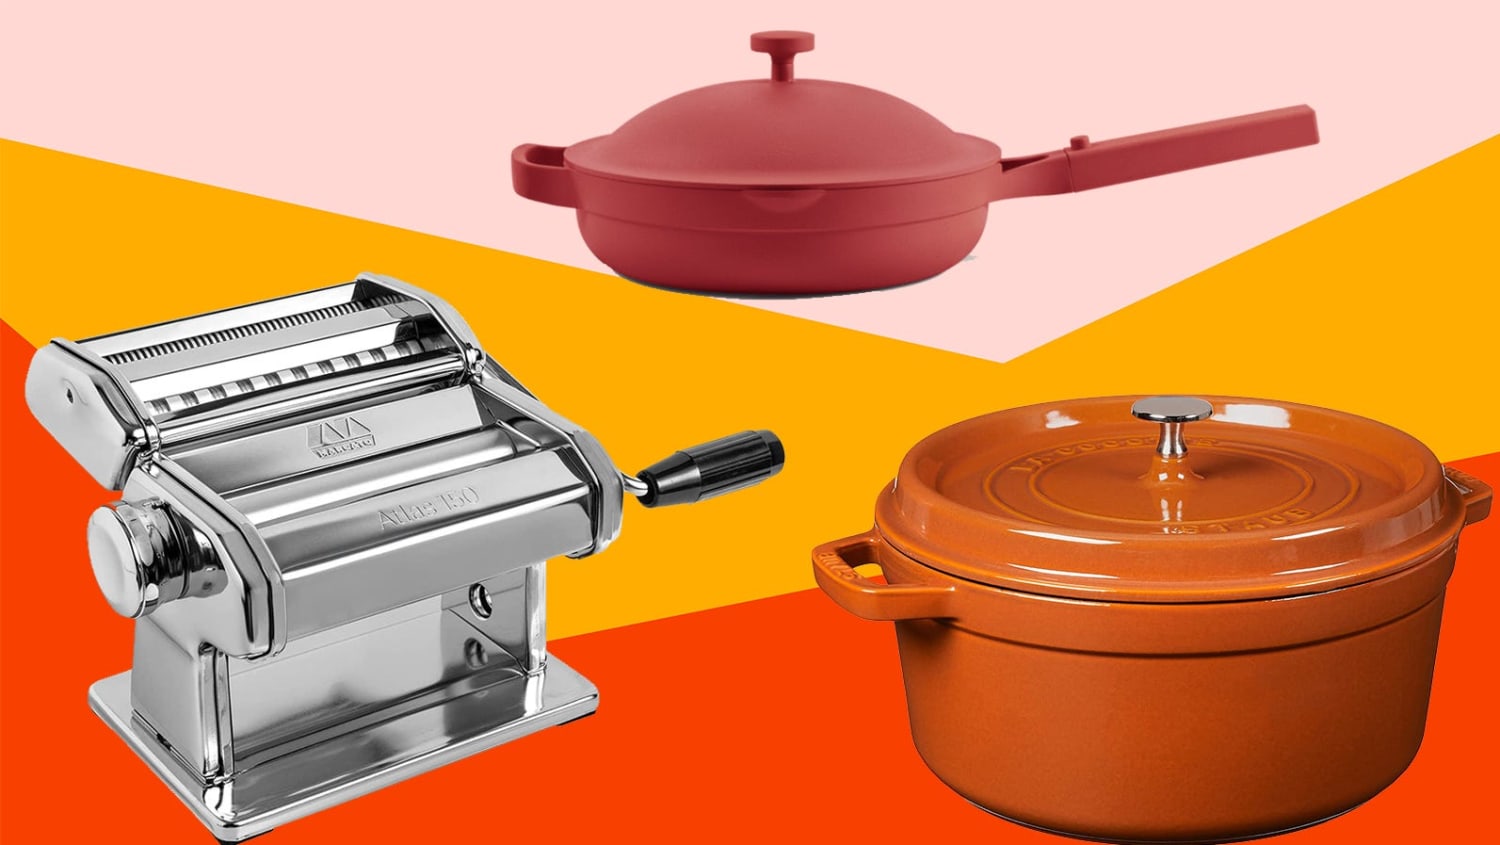 50 amazing kitchen gifts for people who like to cook